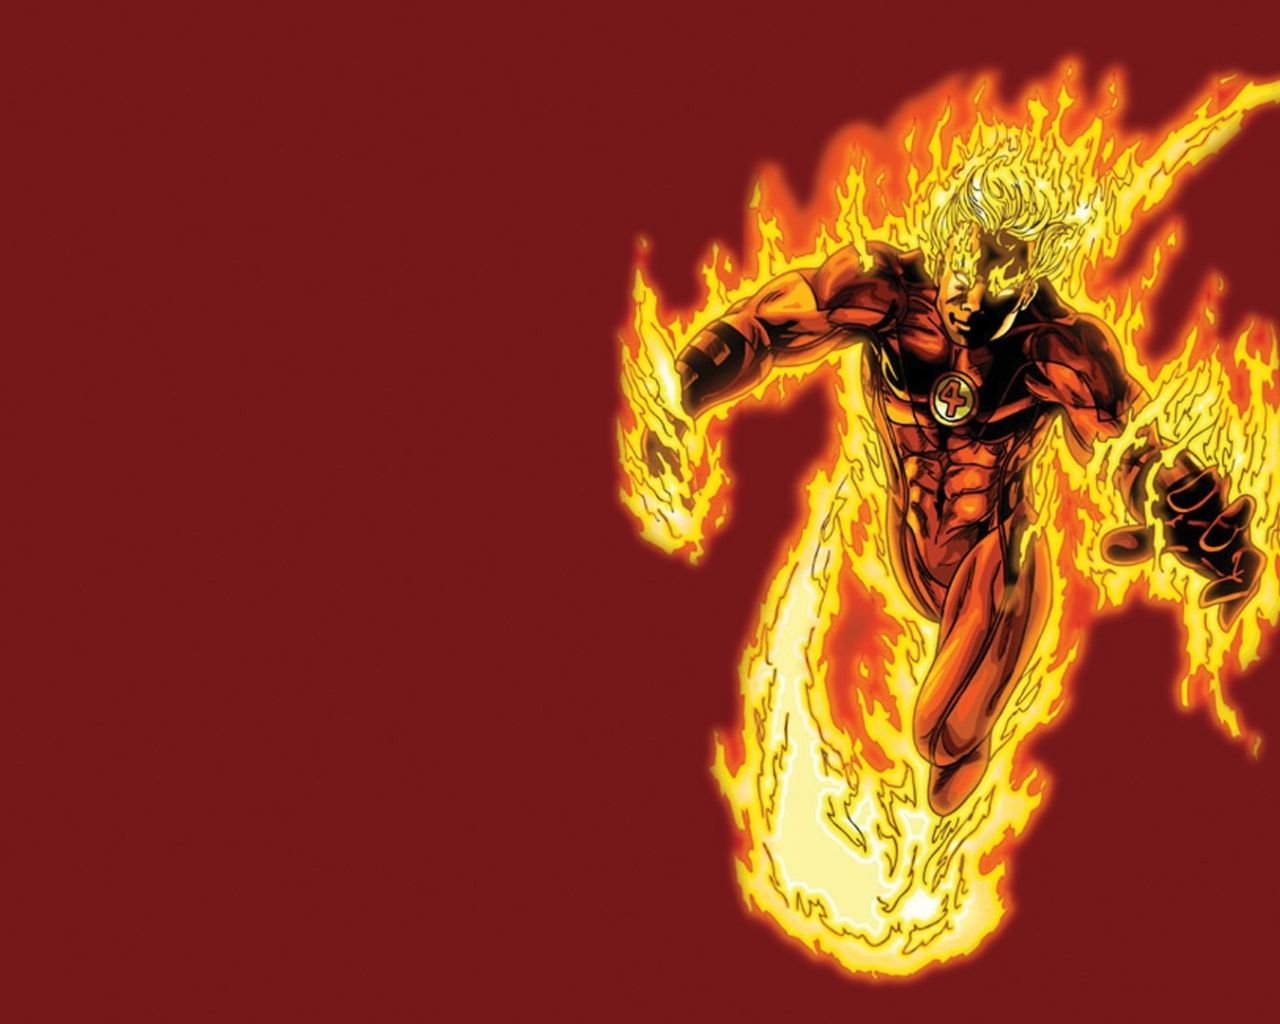 Human Torch Wallpapers